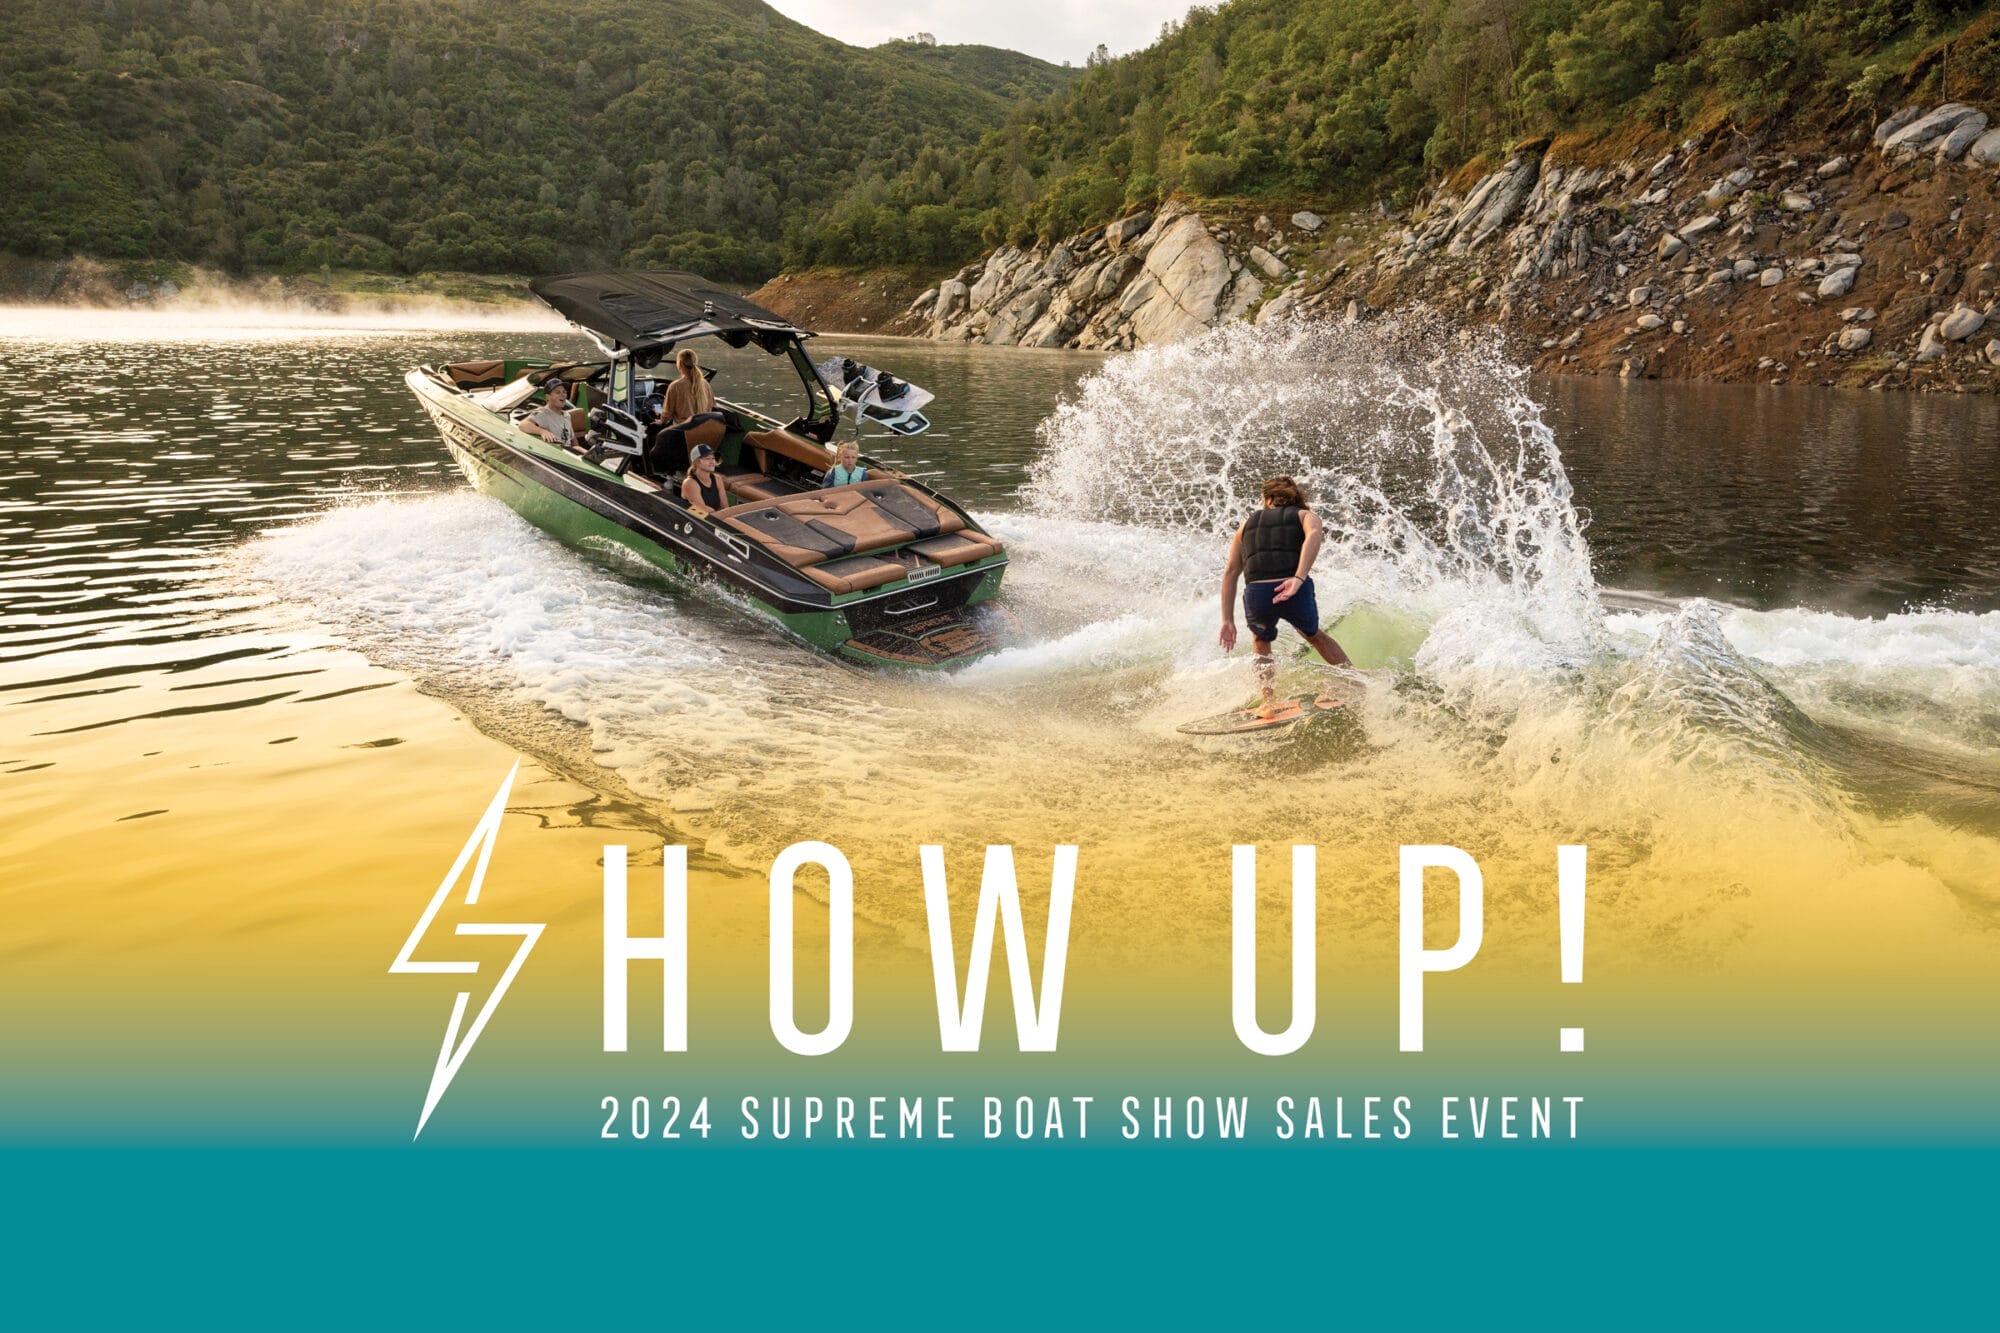 A man is riding a boat with the text show up 2024 supreme boat sales event.